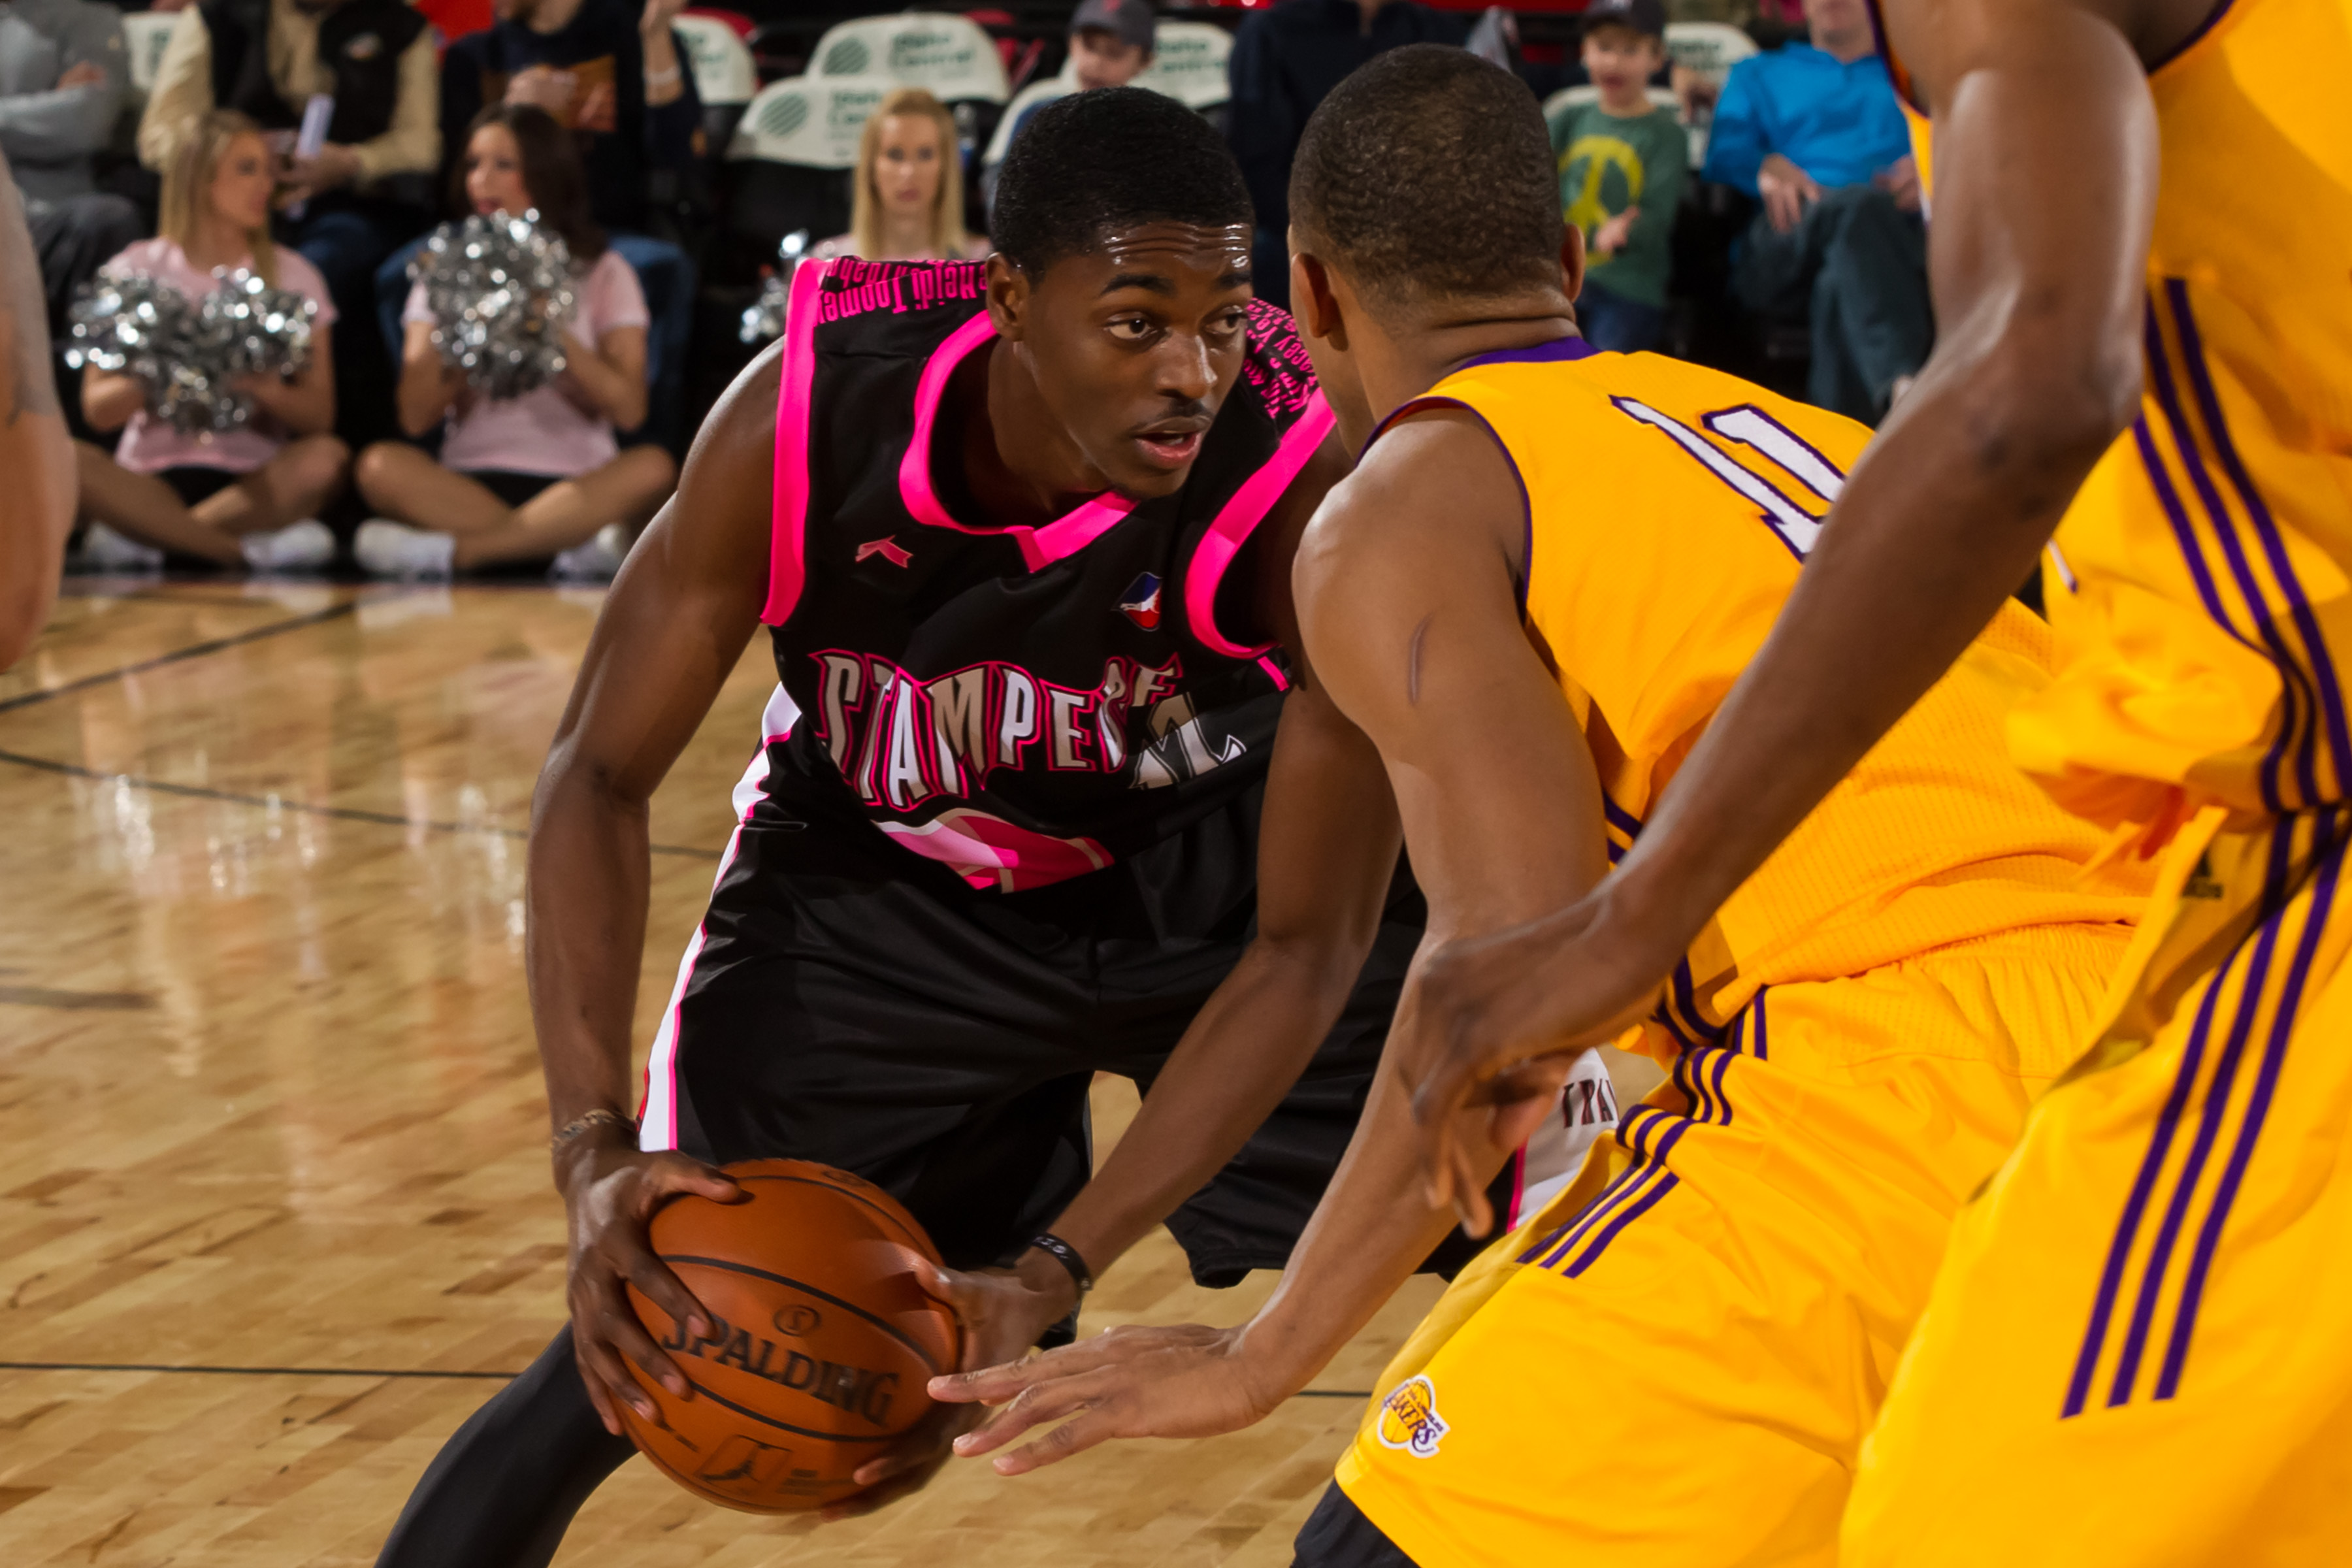 BOISE, ID - FEBRUARY 1: Justin Holiday #12 of the Idaho Stampede looks for a pass around the Los Angeles D-Fenders during the NBA D-League game on February 1, 2013 at CenturyLink Arena in Boise, Idaho. The Stampede wore pink jerseys for a mammography assistance fundraiser. NOTE TO USER: User expressly acknowledges and agrees that, by downloading and/or using this Photograph, user is consenting to the terms and conditions of the Getty Images License Agreement. Mandatory Copyright Notice: Copyright 2013 NBAE (Photo by Otto Kitsinger/NBAE via Getty Images)